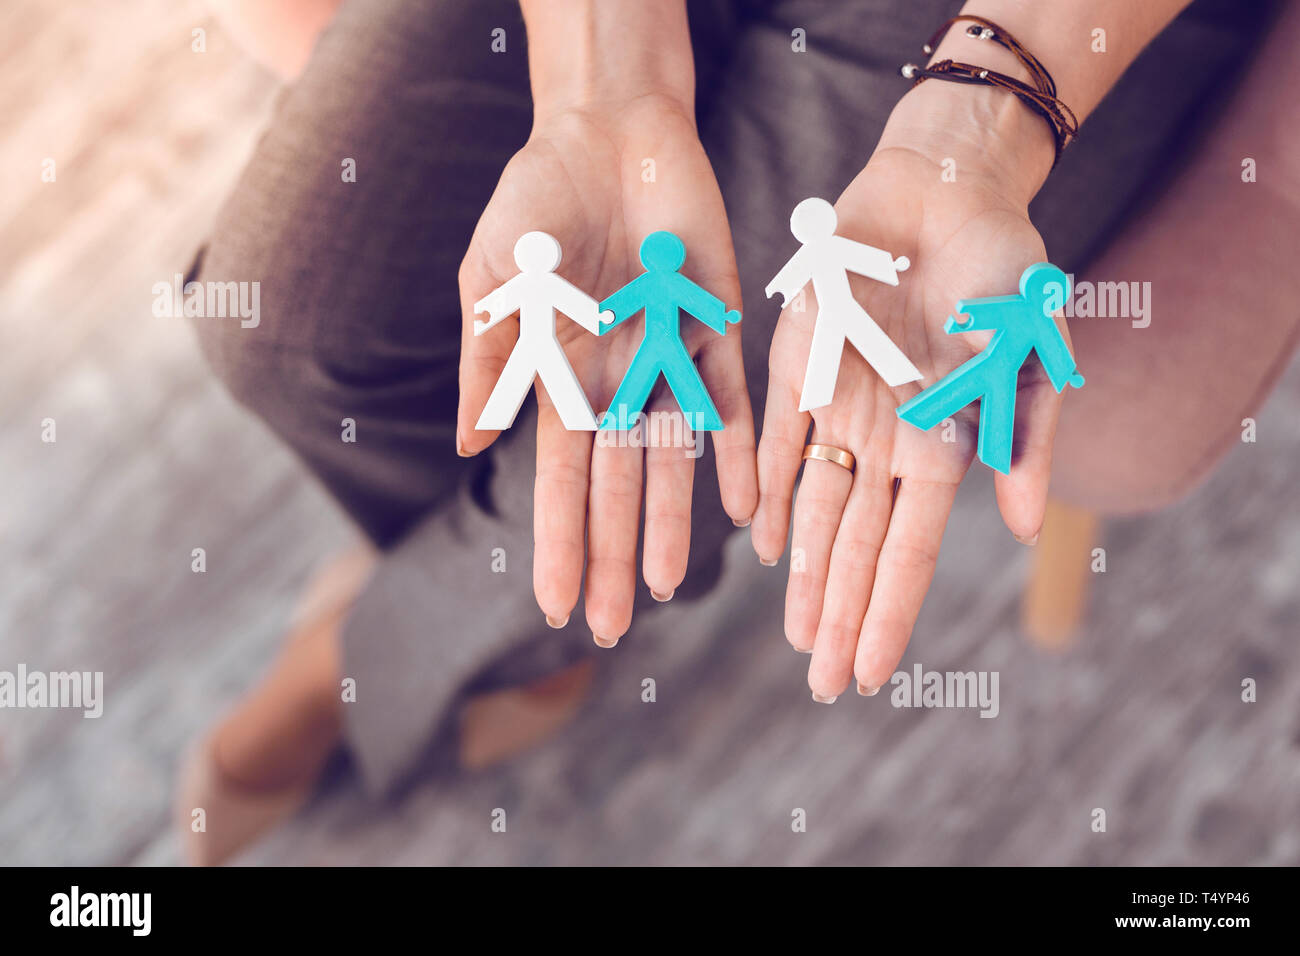 Close-up photo of human stick figures being placed on palms. Stock Photo